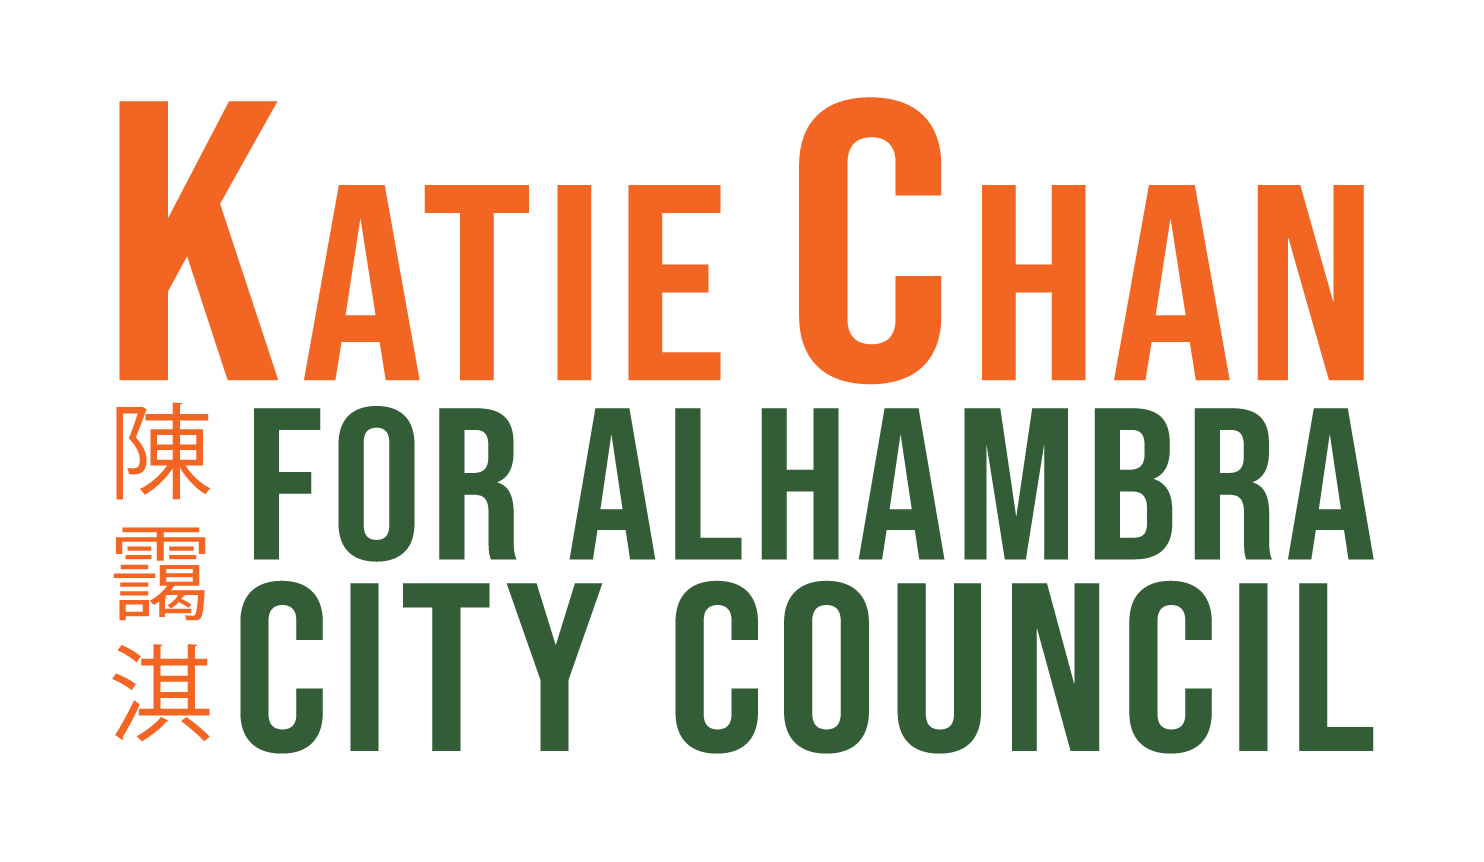 Katie Chan for Alhambra City Council